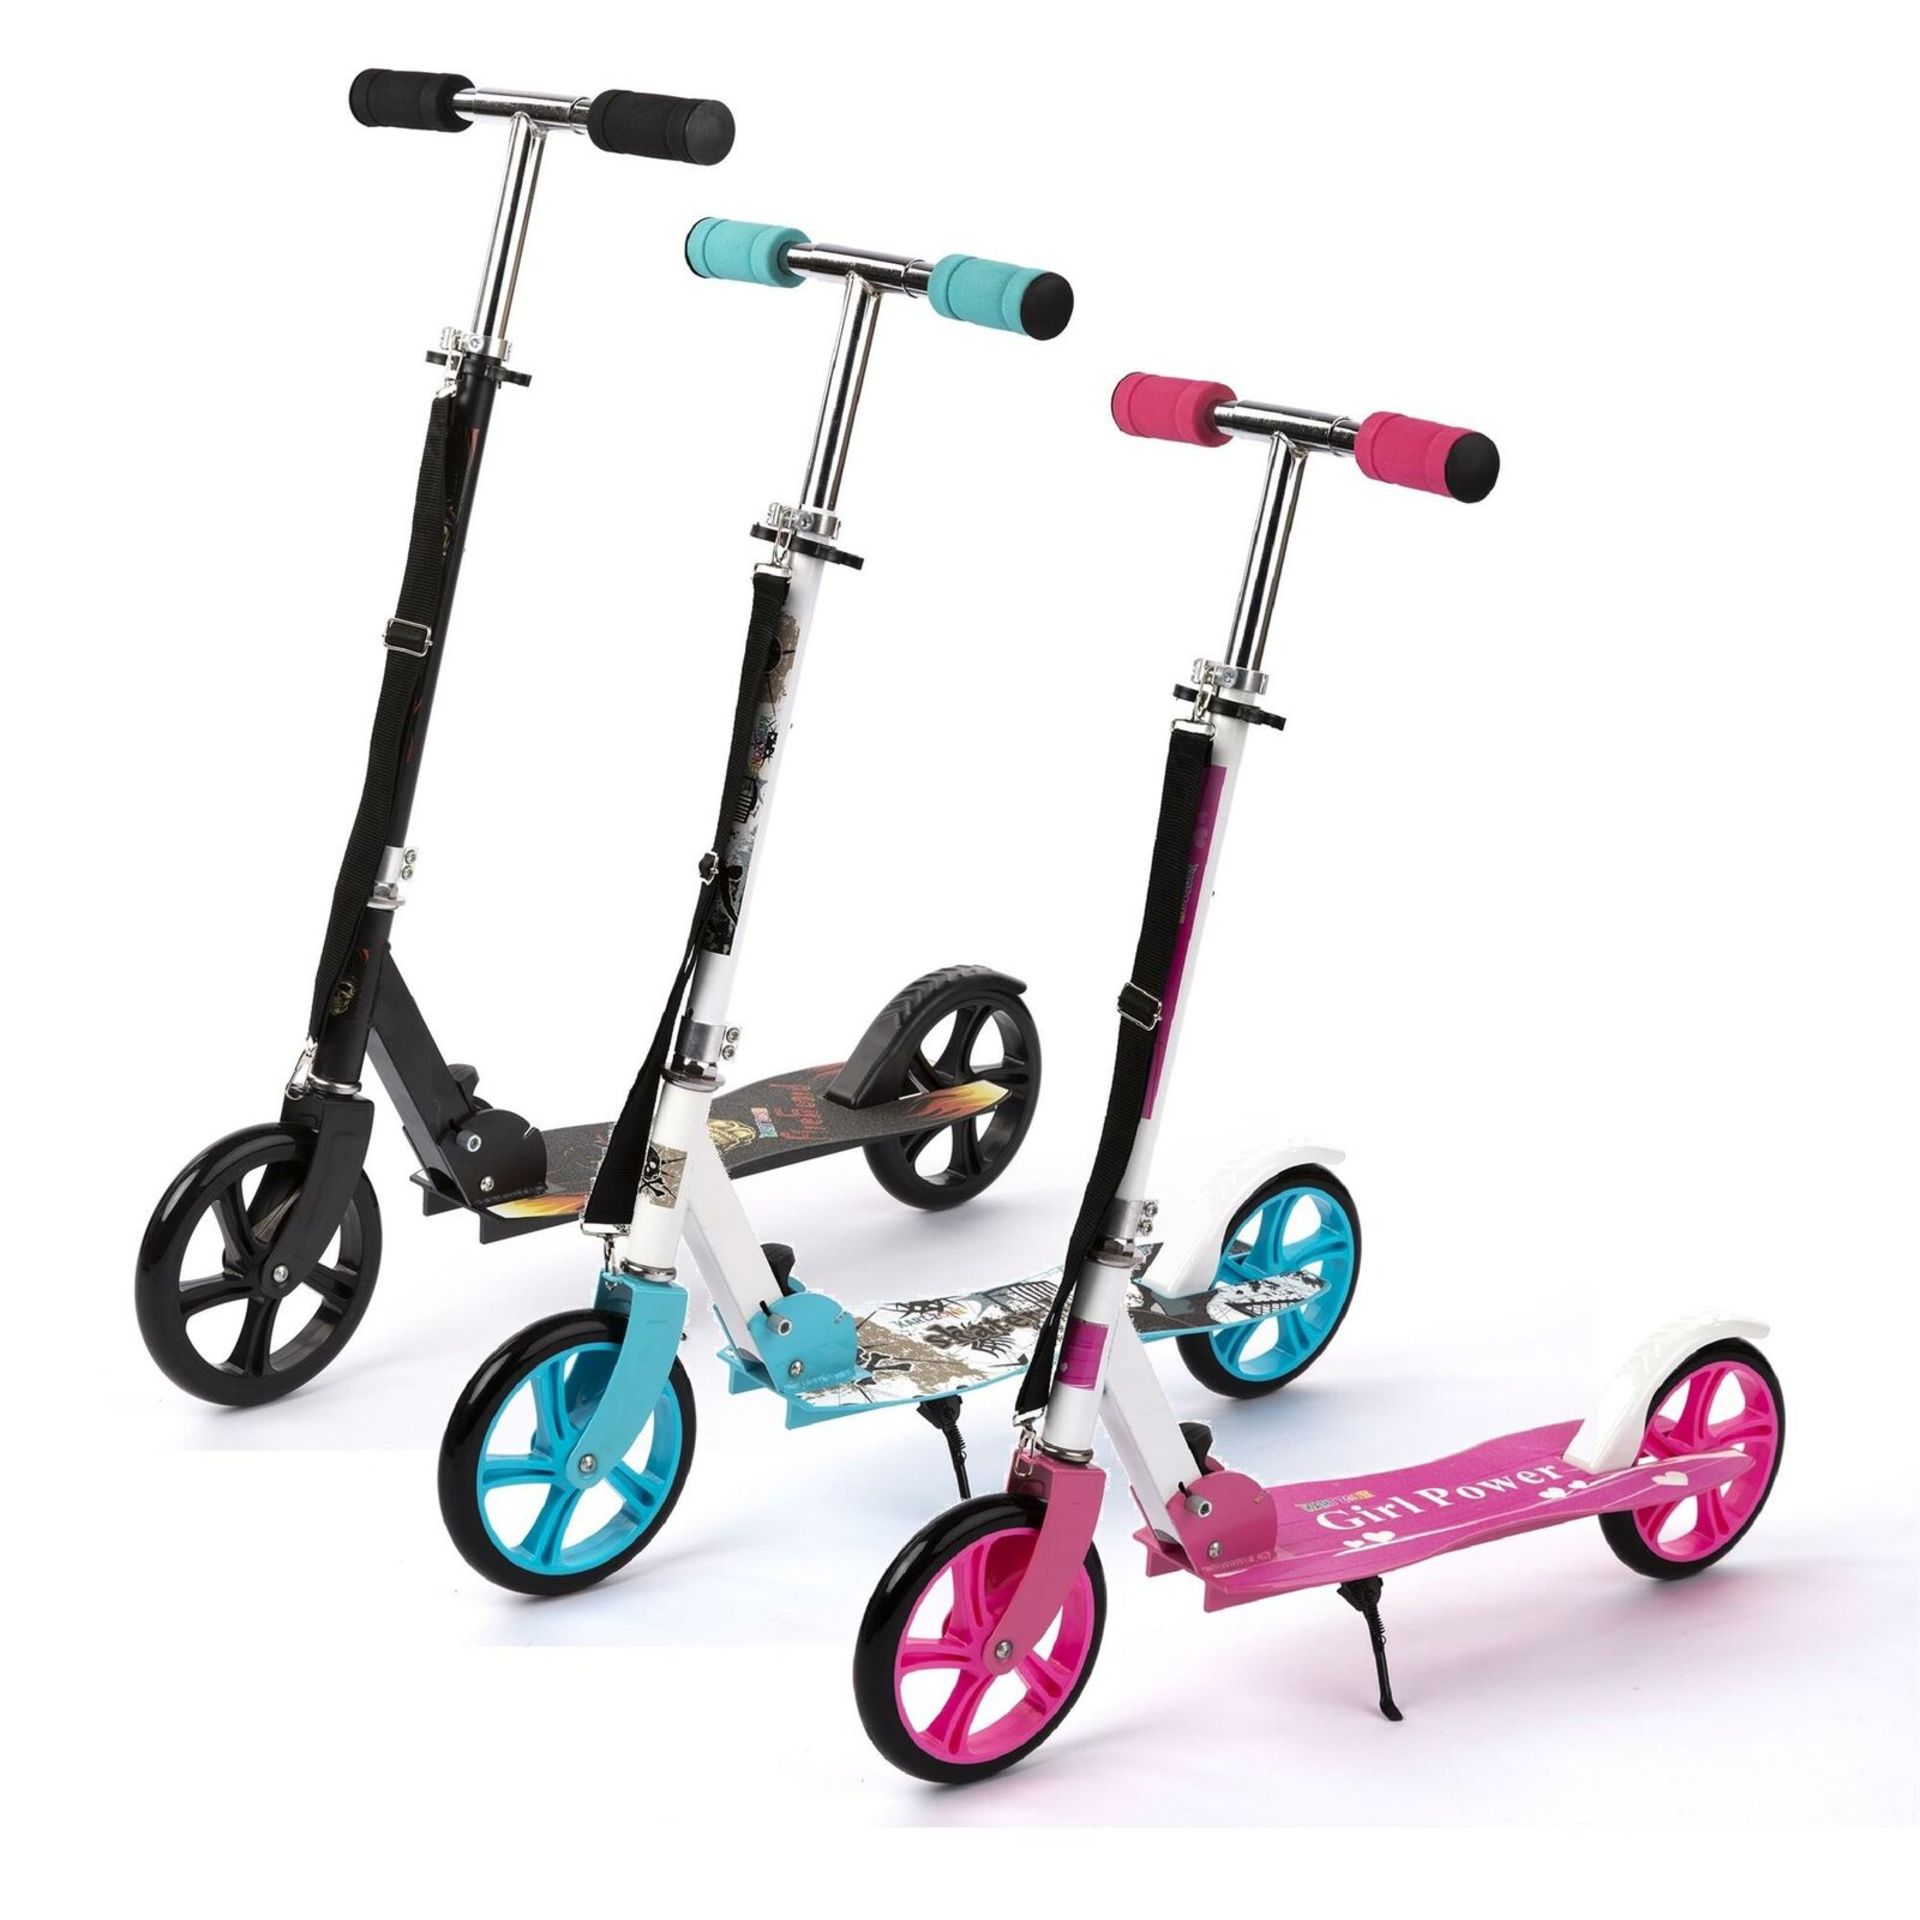 2 X BRAND NEW BOXED KART ZONE LIGHTWEIGHT ALUMINIUM SCOOTERS. ONLY 3.8KG